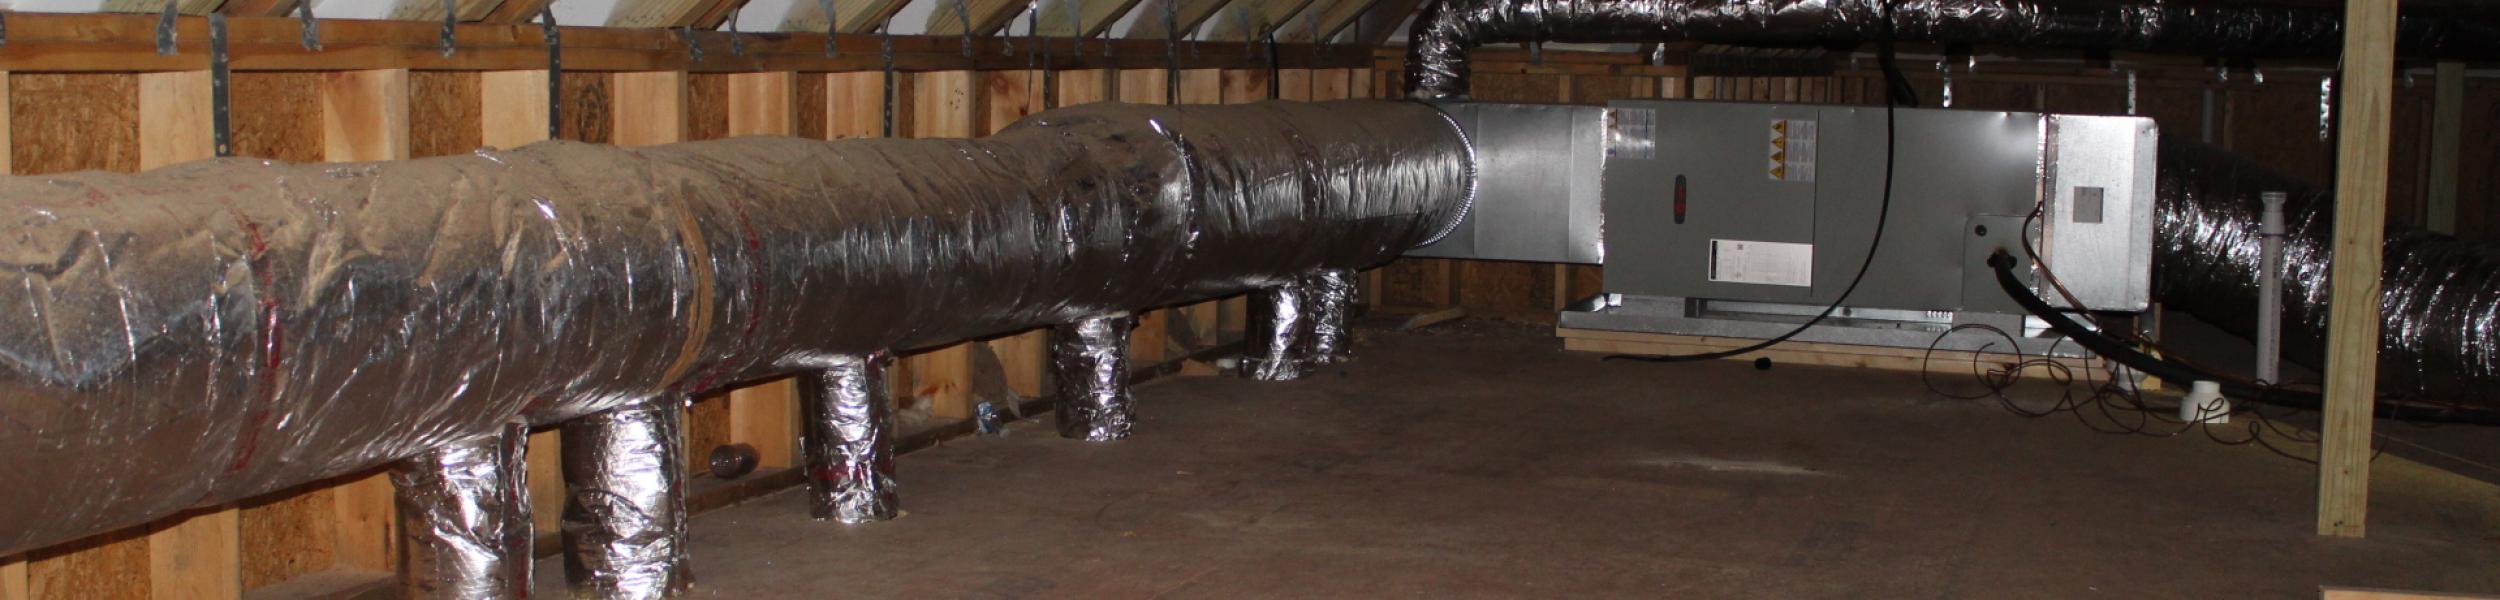 image of an attic's duct system